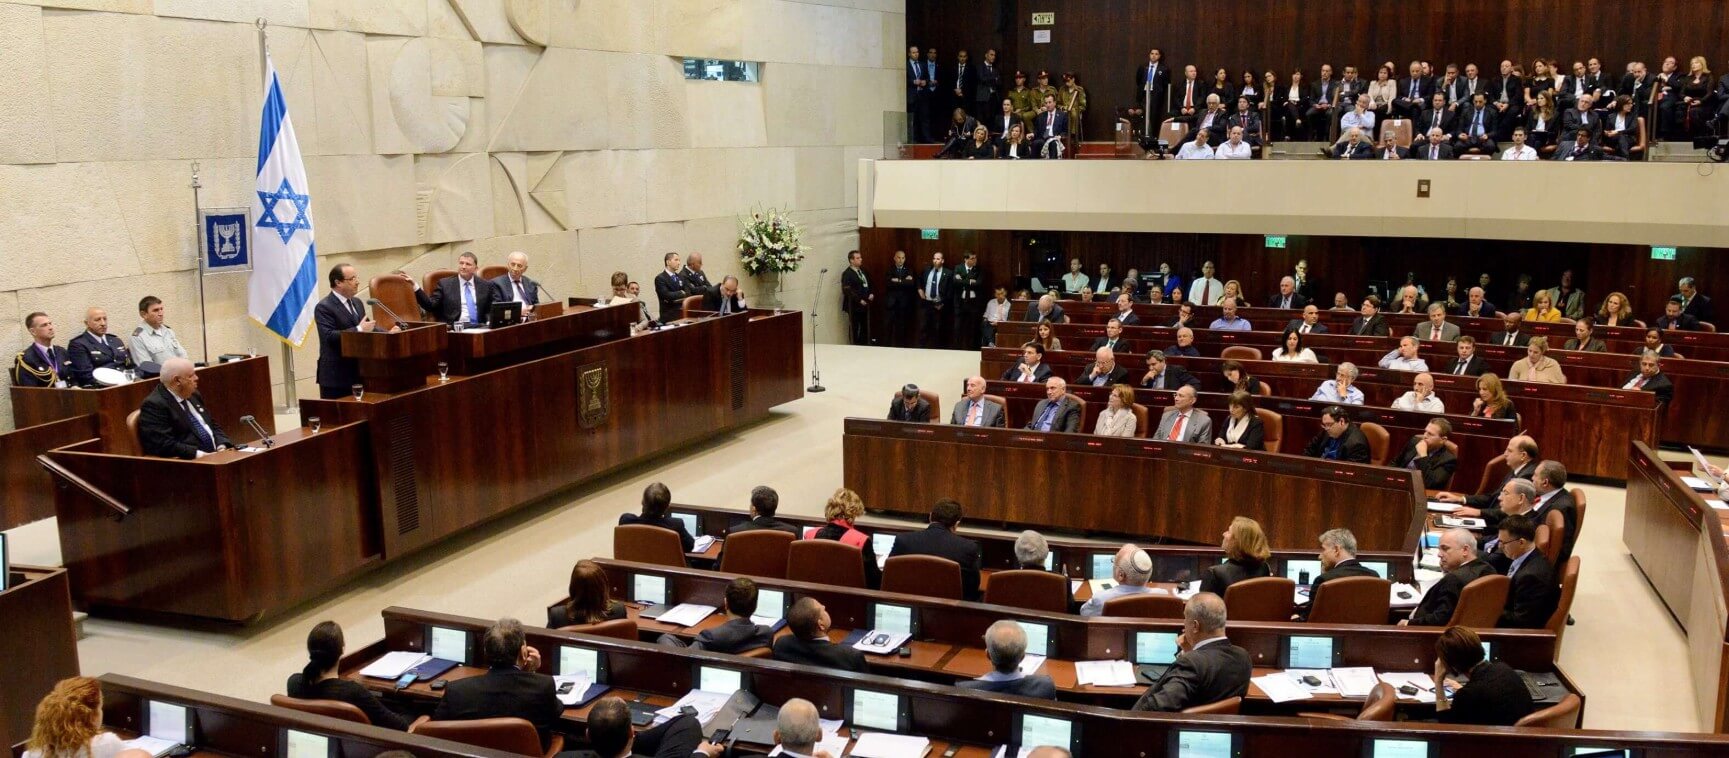 PROMOTING EQUAL REPRESENTATION IN THE KNESSET PARLIAMENTARY POSITIONS